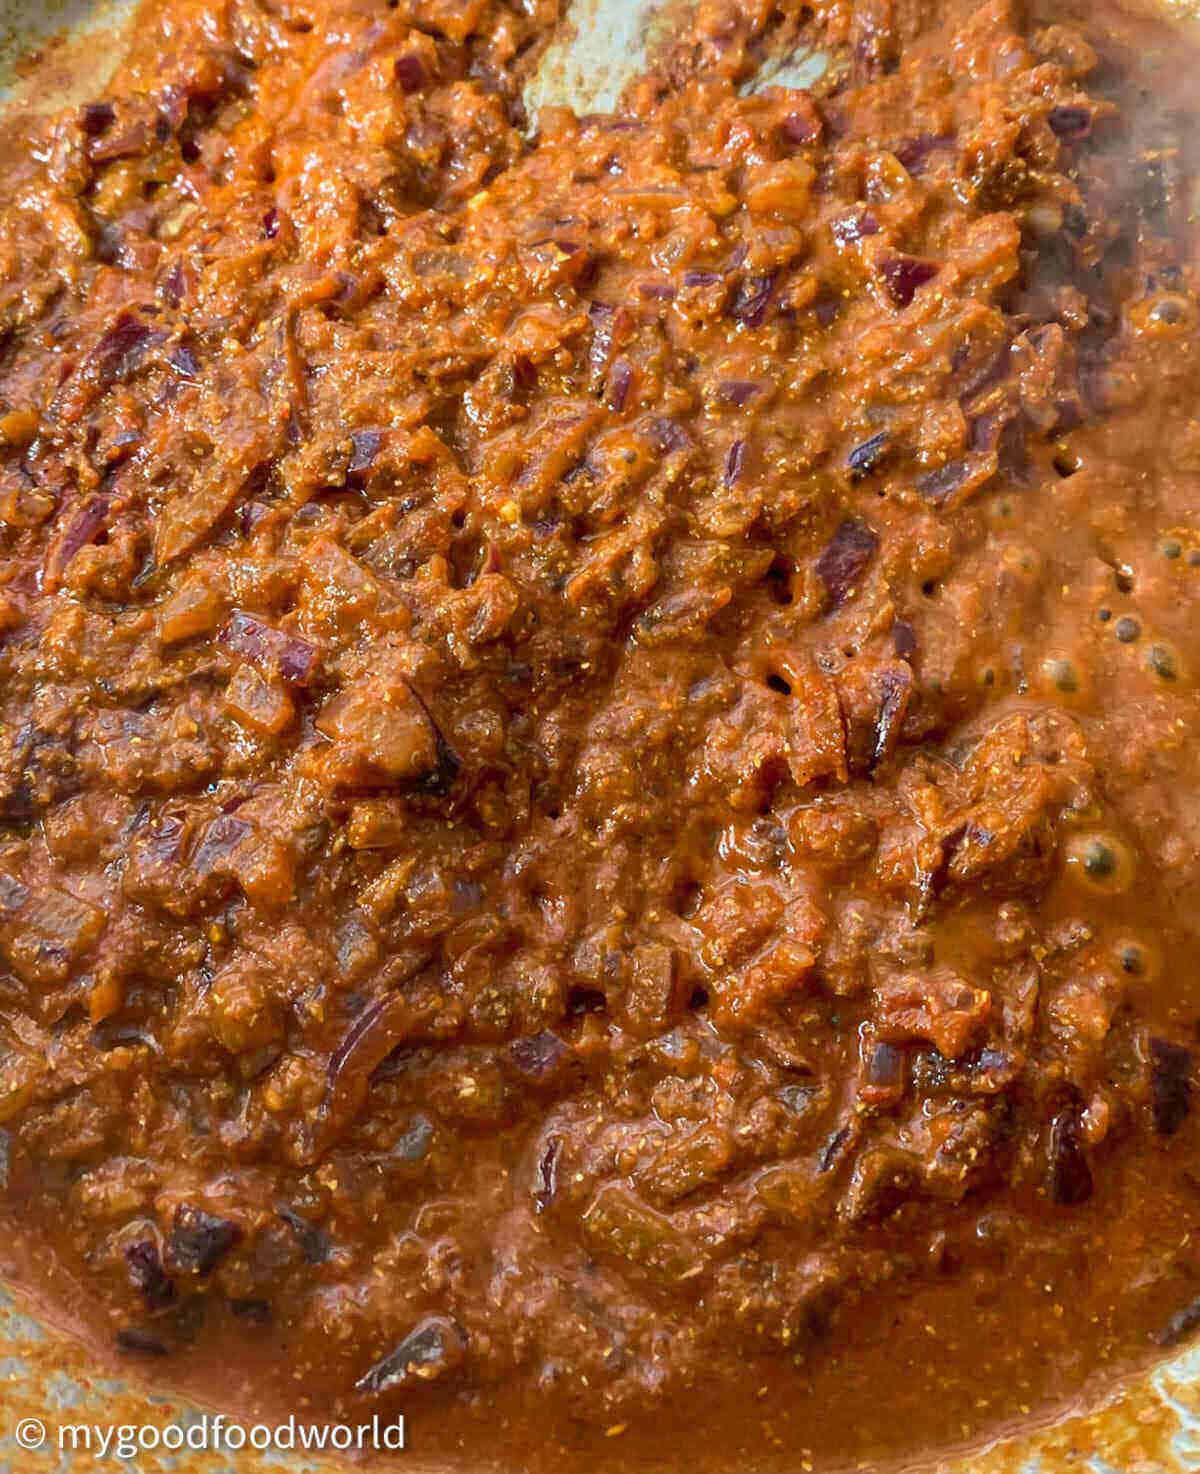 Masala paste with ginger garlic paste, spices and tomato paste in it, cooking in a saucepan.